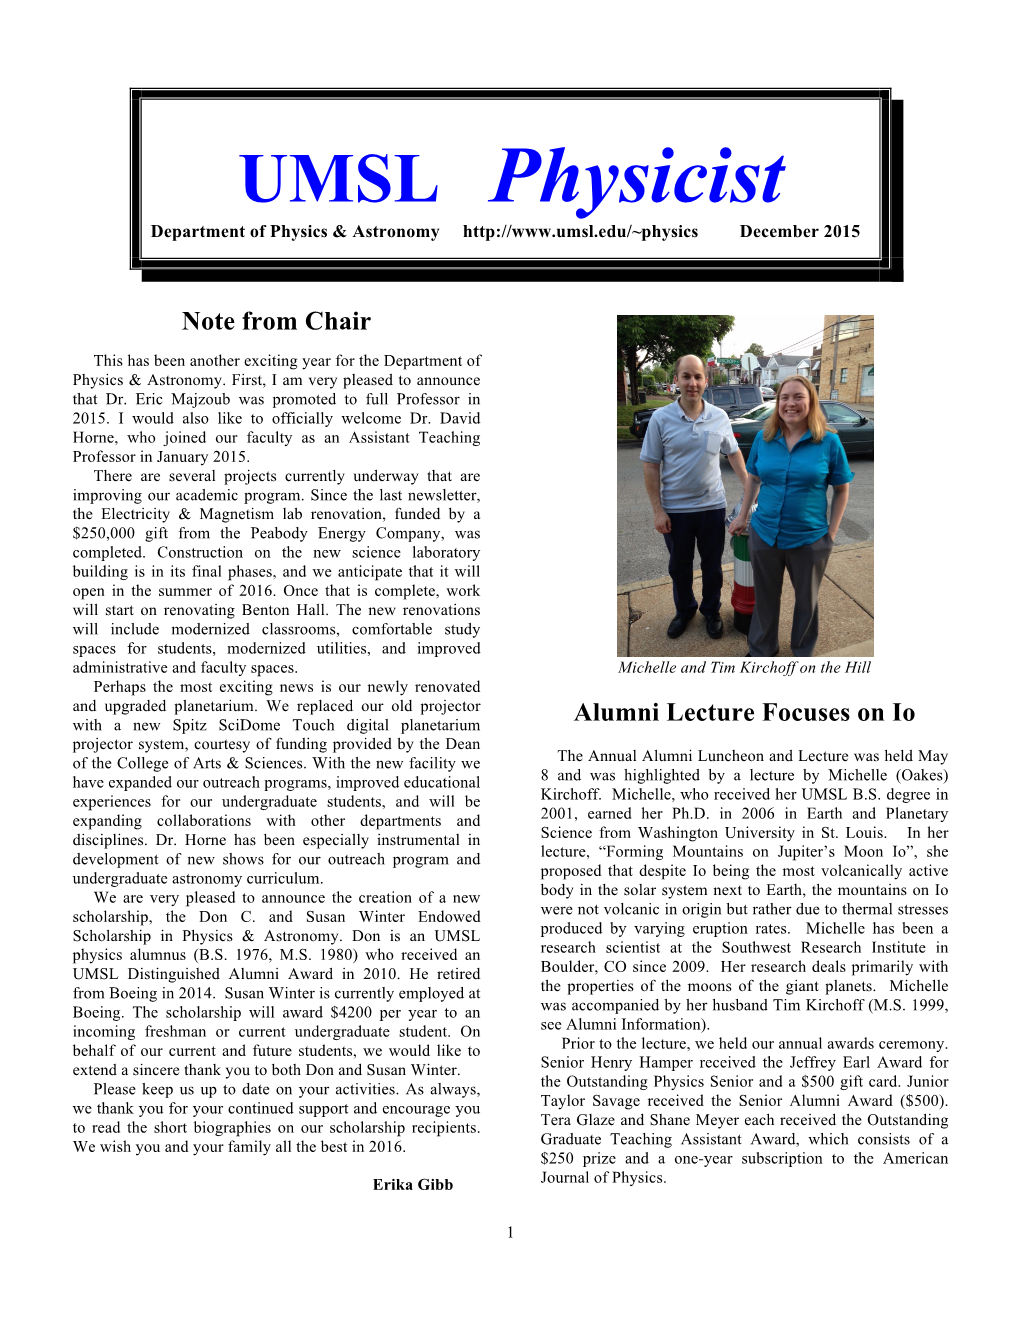 UMSL Physicist Department of Physics & Astronomy December 2015